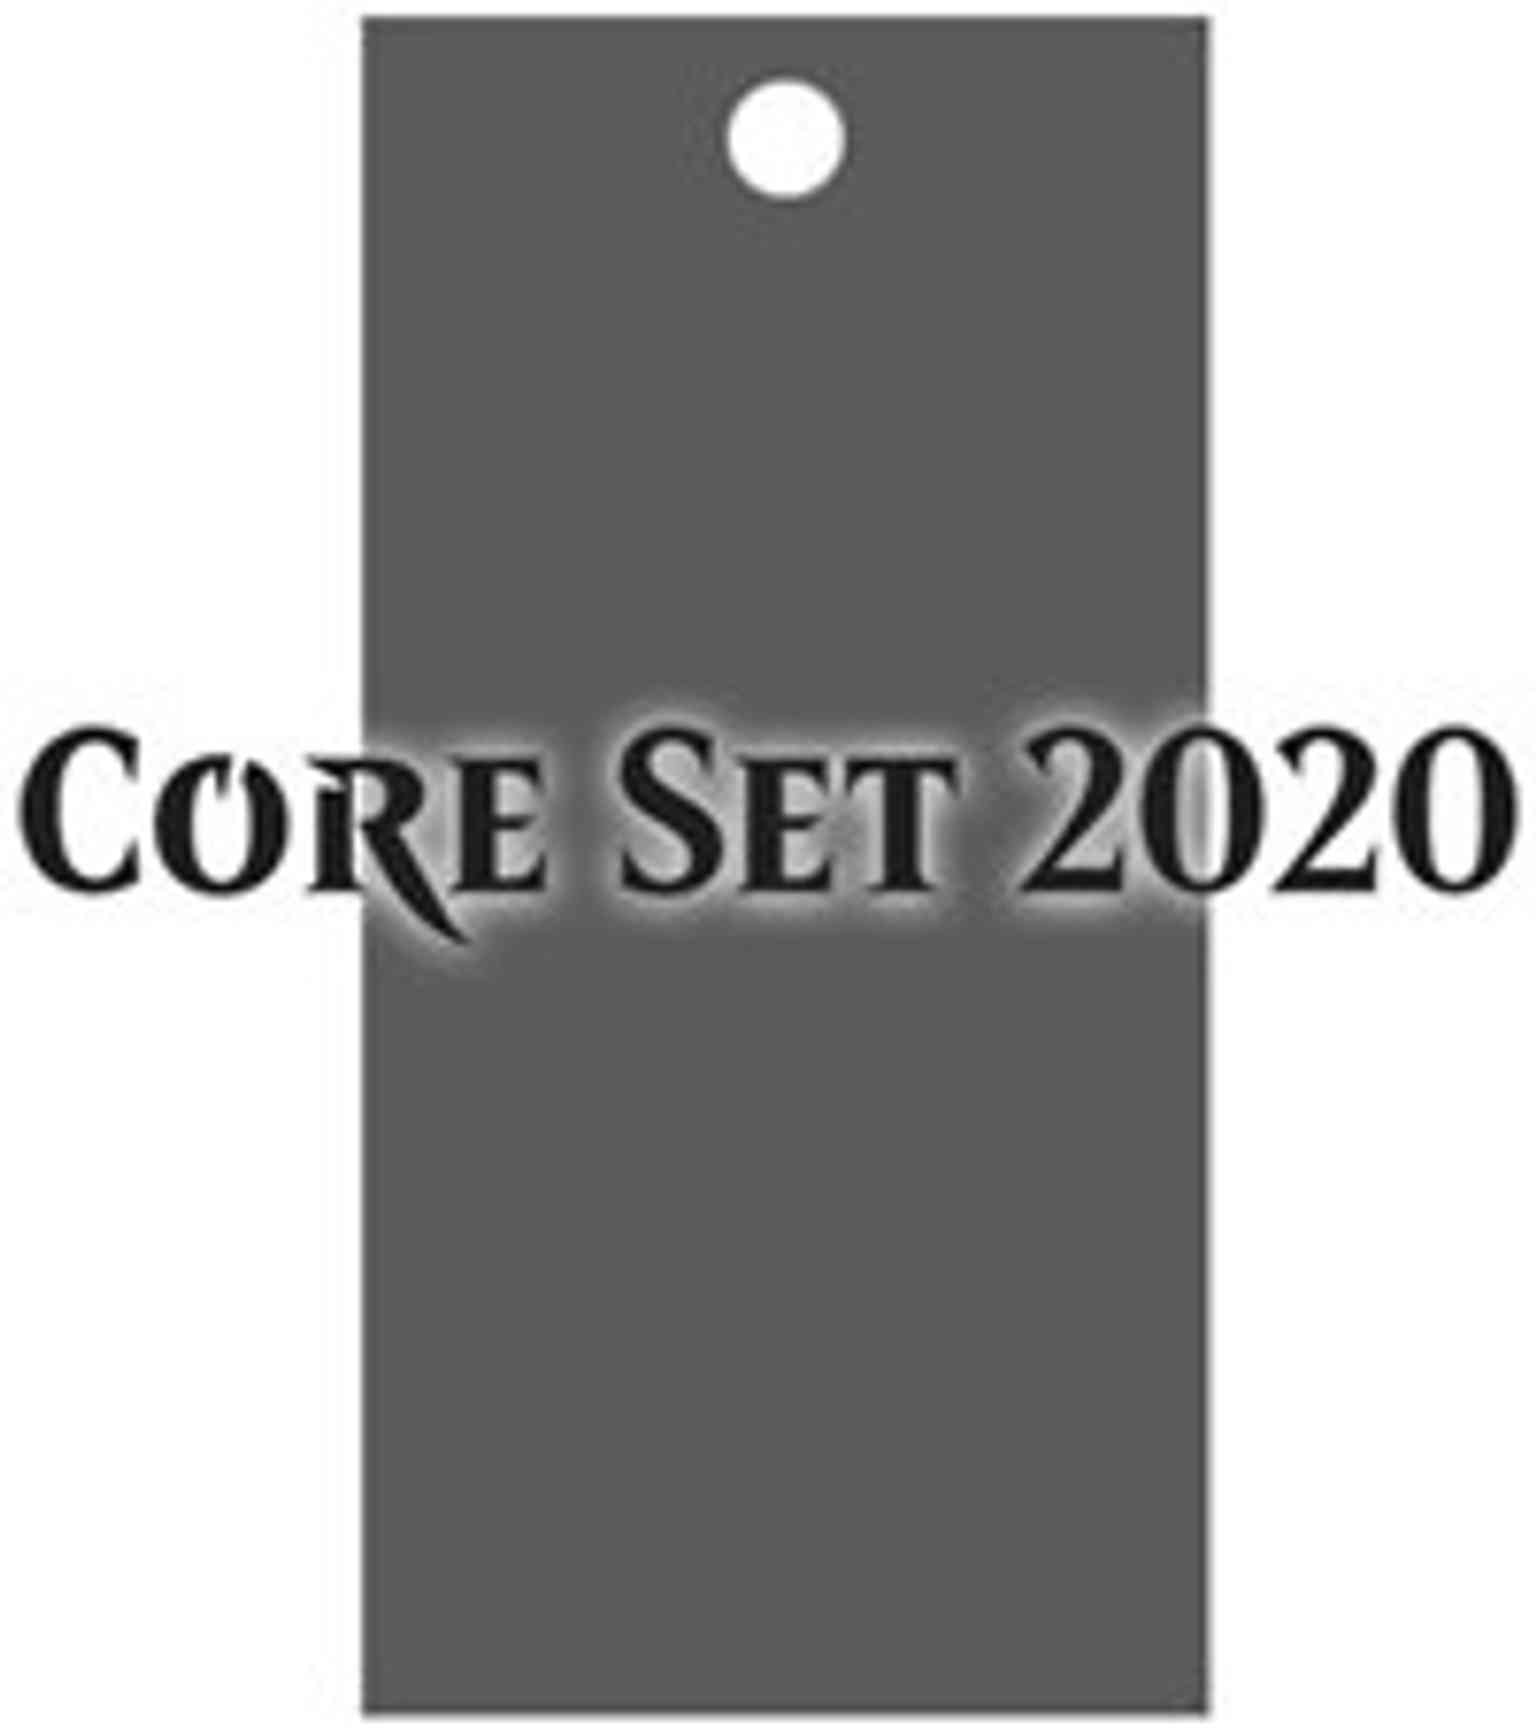 Core Set 2020 - Booster Pack magic card front